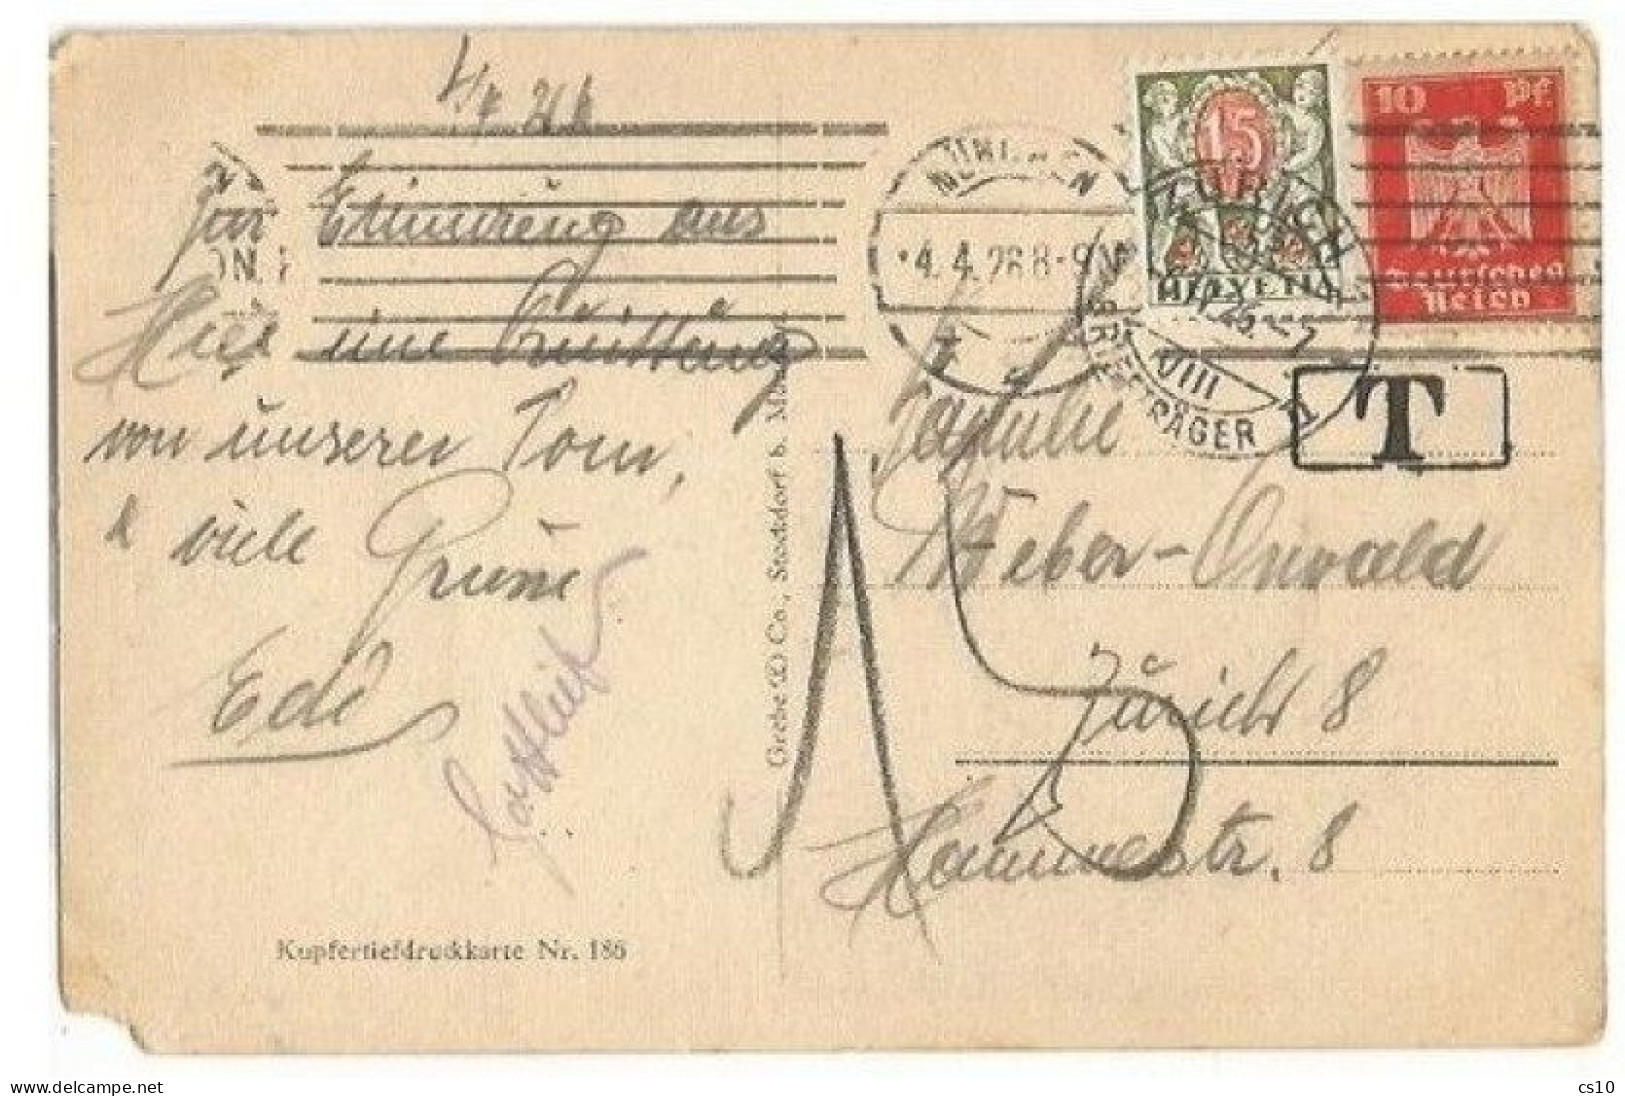 Suisse 6apr1926 Postage Due C.15 Taxing Pcard Munchen 4apr With Eagle Pf10 Solo To Zurich - Impuesto